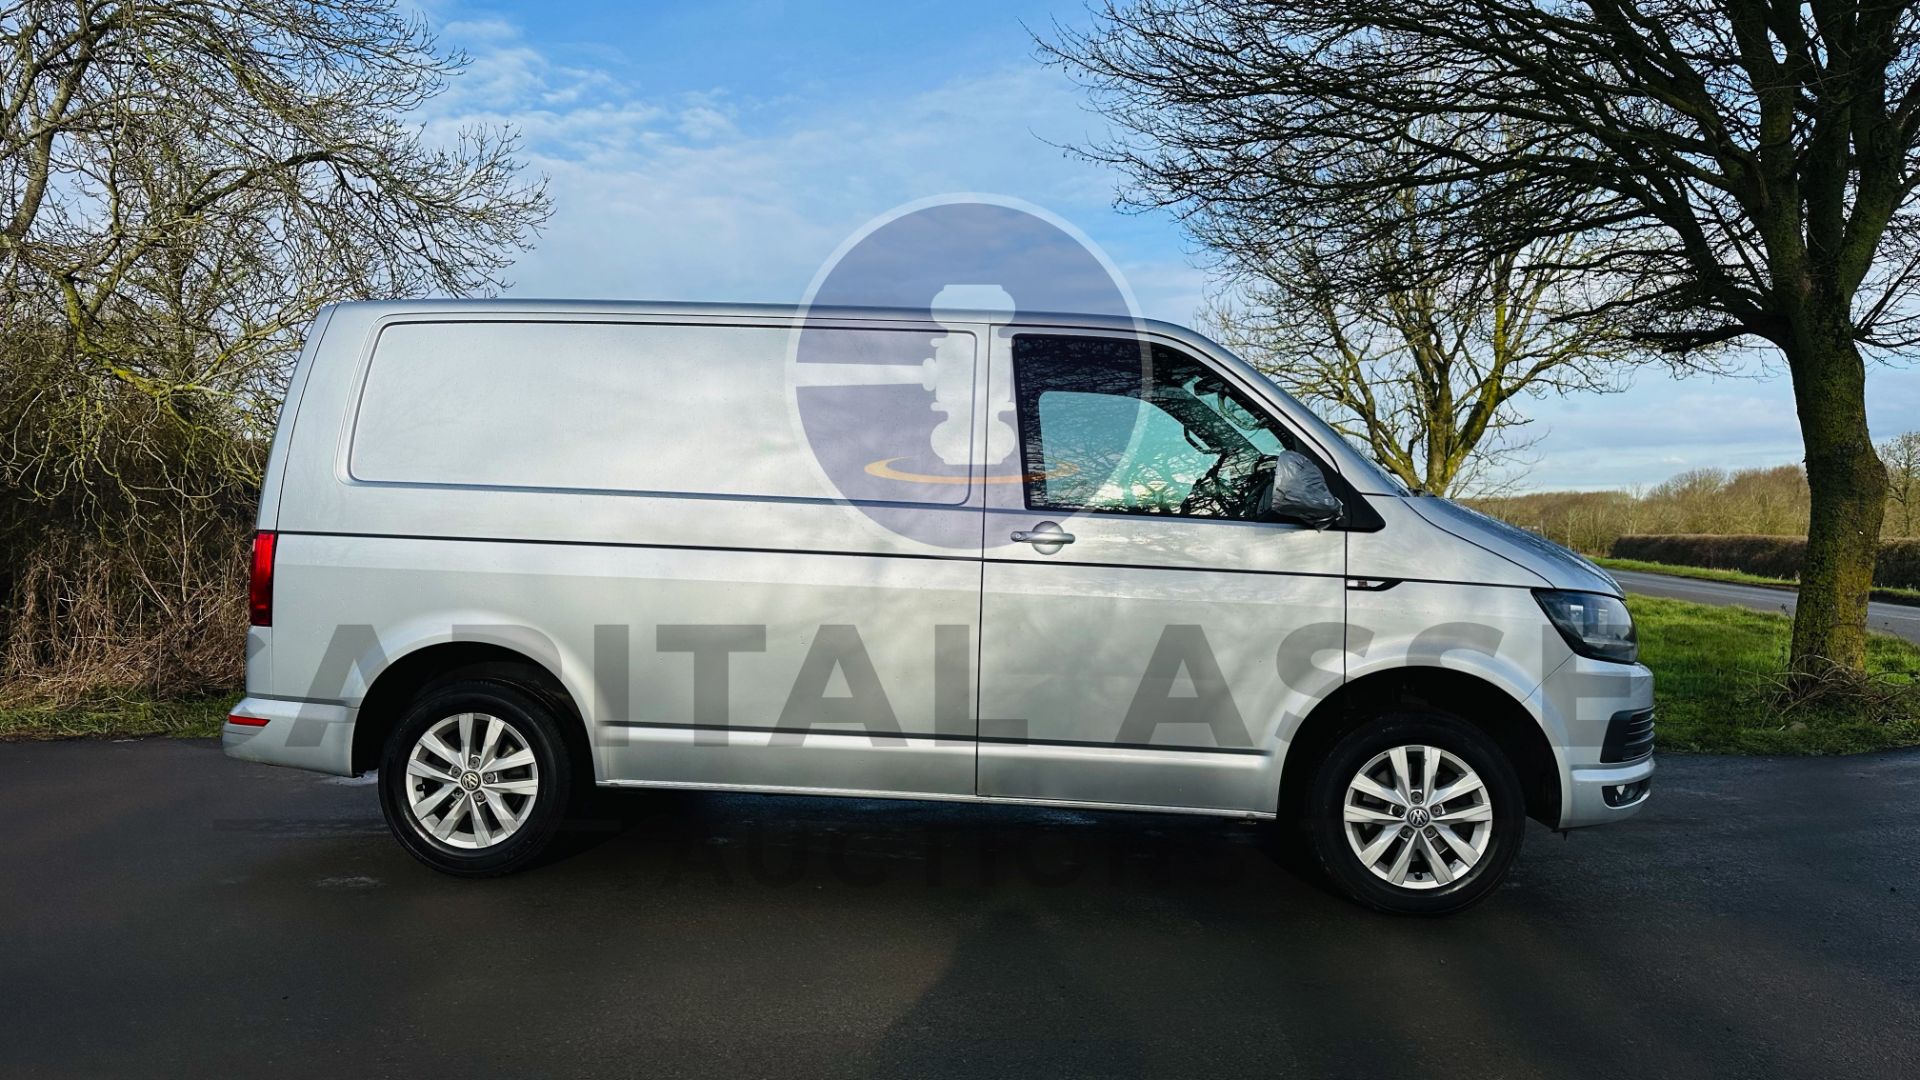 (On Sale) VOLKSWAGEN TRANSPORTER T30 *HIGHLINE EDITION* (67 REG - EURO 6) AUTO STOP/START *AIR CON* - Image 10 of 46